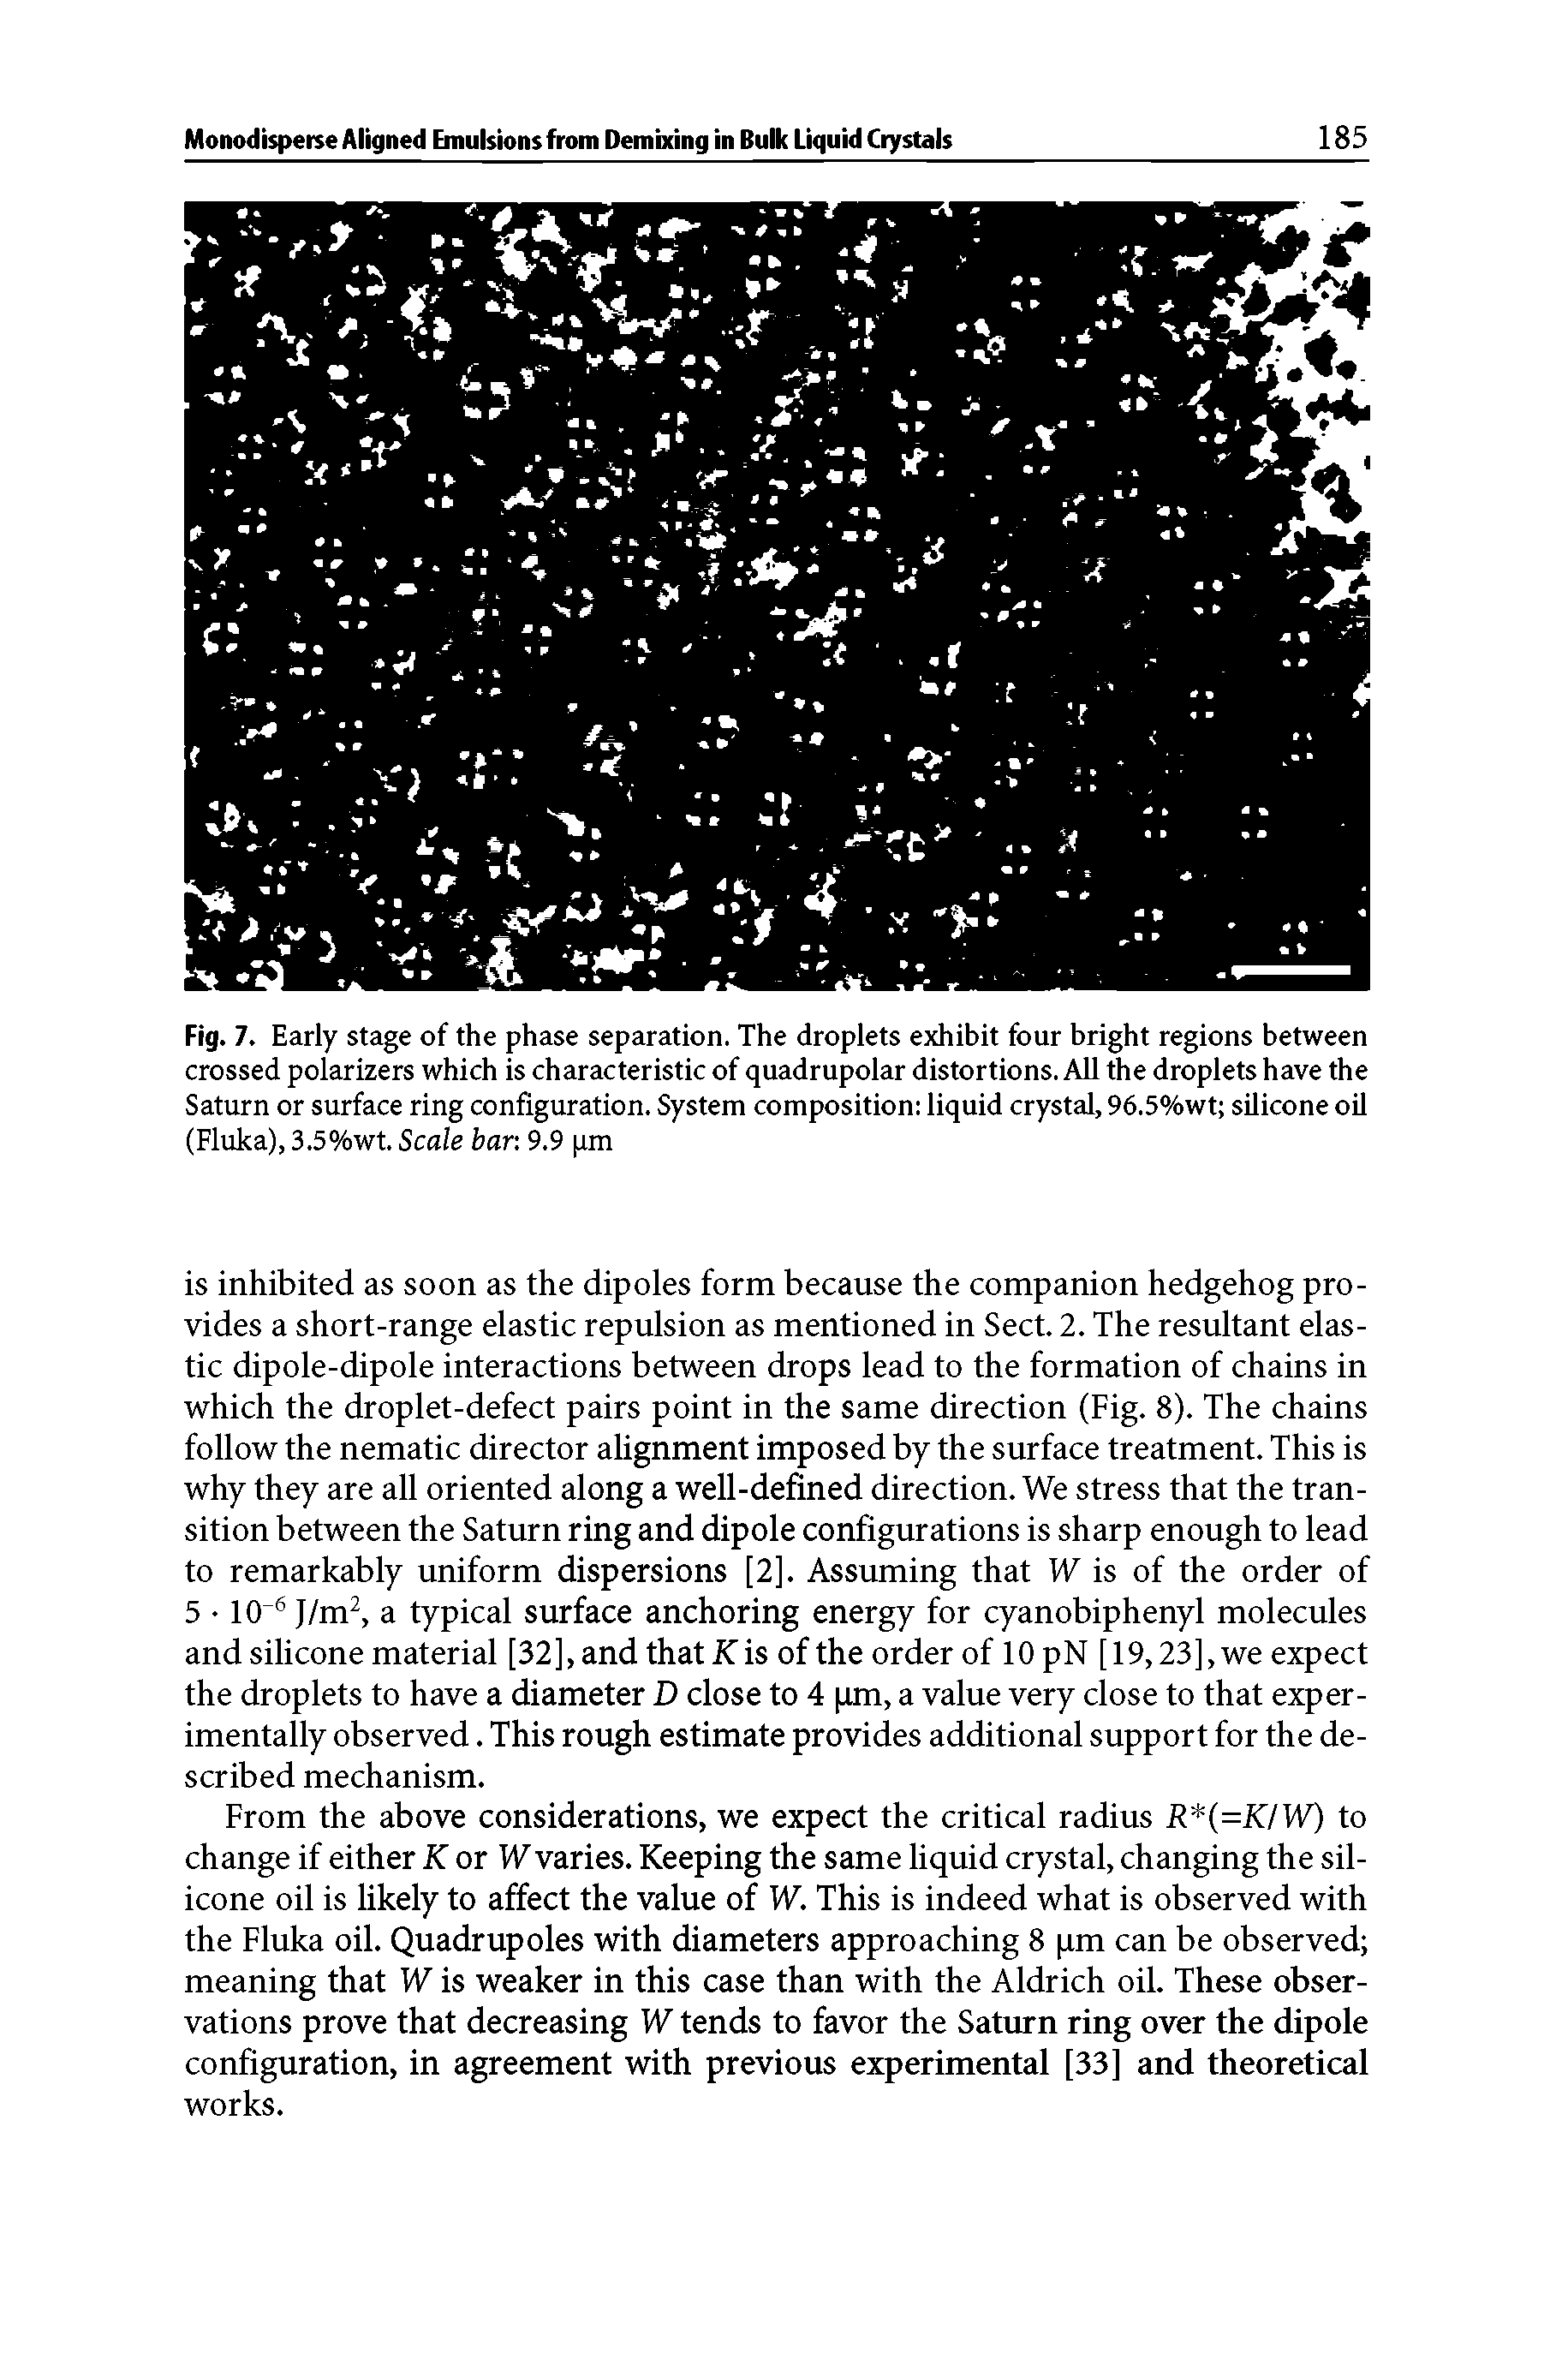 Fig. 7. Early stage of the phase separation. The droplets exhibit four bright regions between crossed polarizers which is characteristic of quadrupolar distortions. AU the droplets have the Saturn or surface ring configuration. System composition liquid crystal, 96.5%wt silicone oil (Fluka), 3.5%wt. Scale bar 9.9 pm...